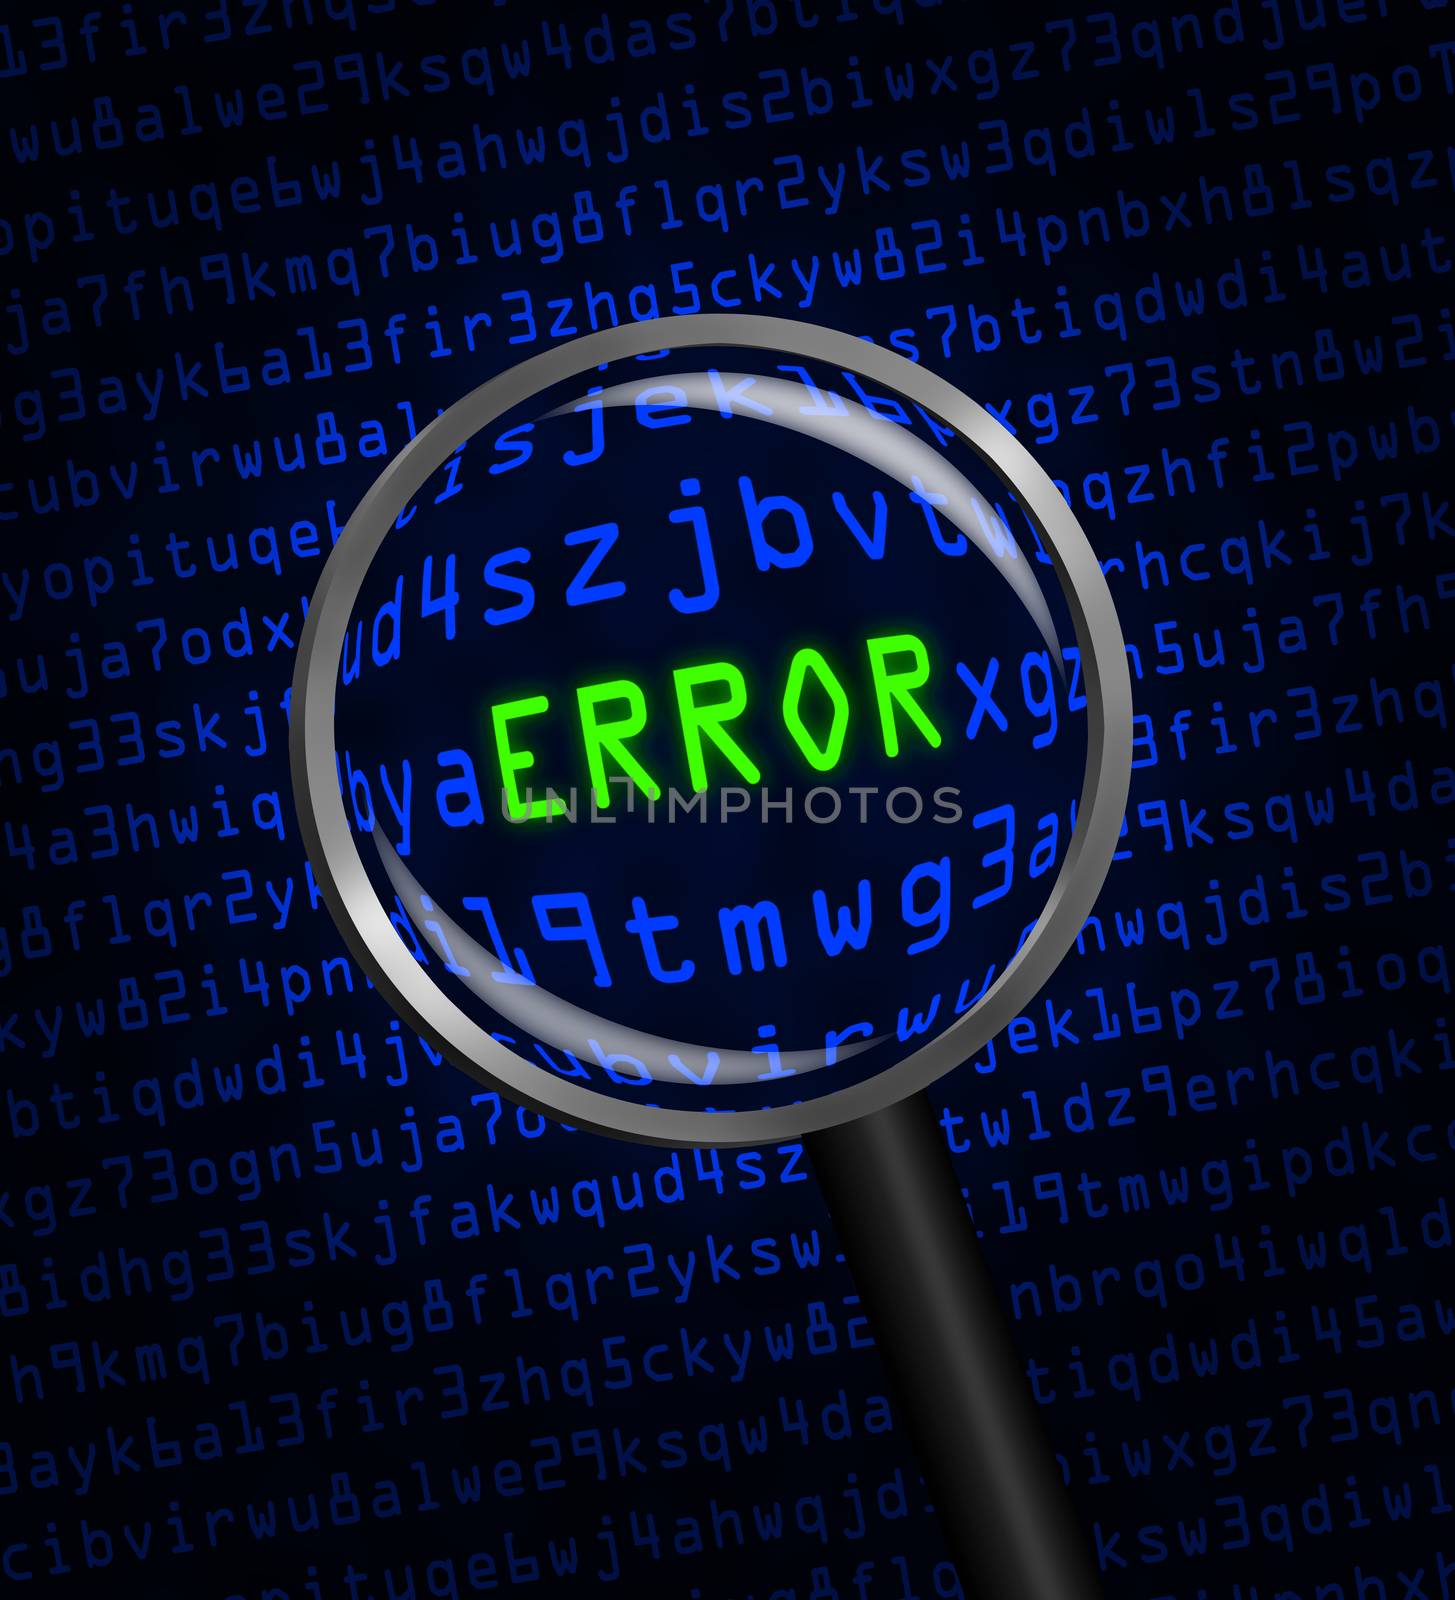 "ERROR" revealed in computer code through a magnifying glass by Balefire9